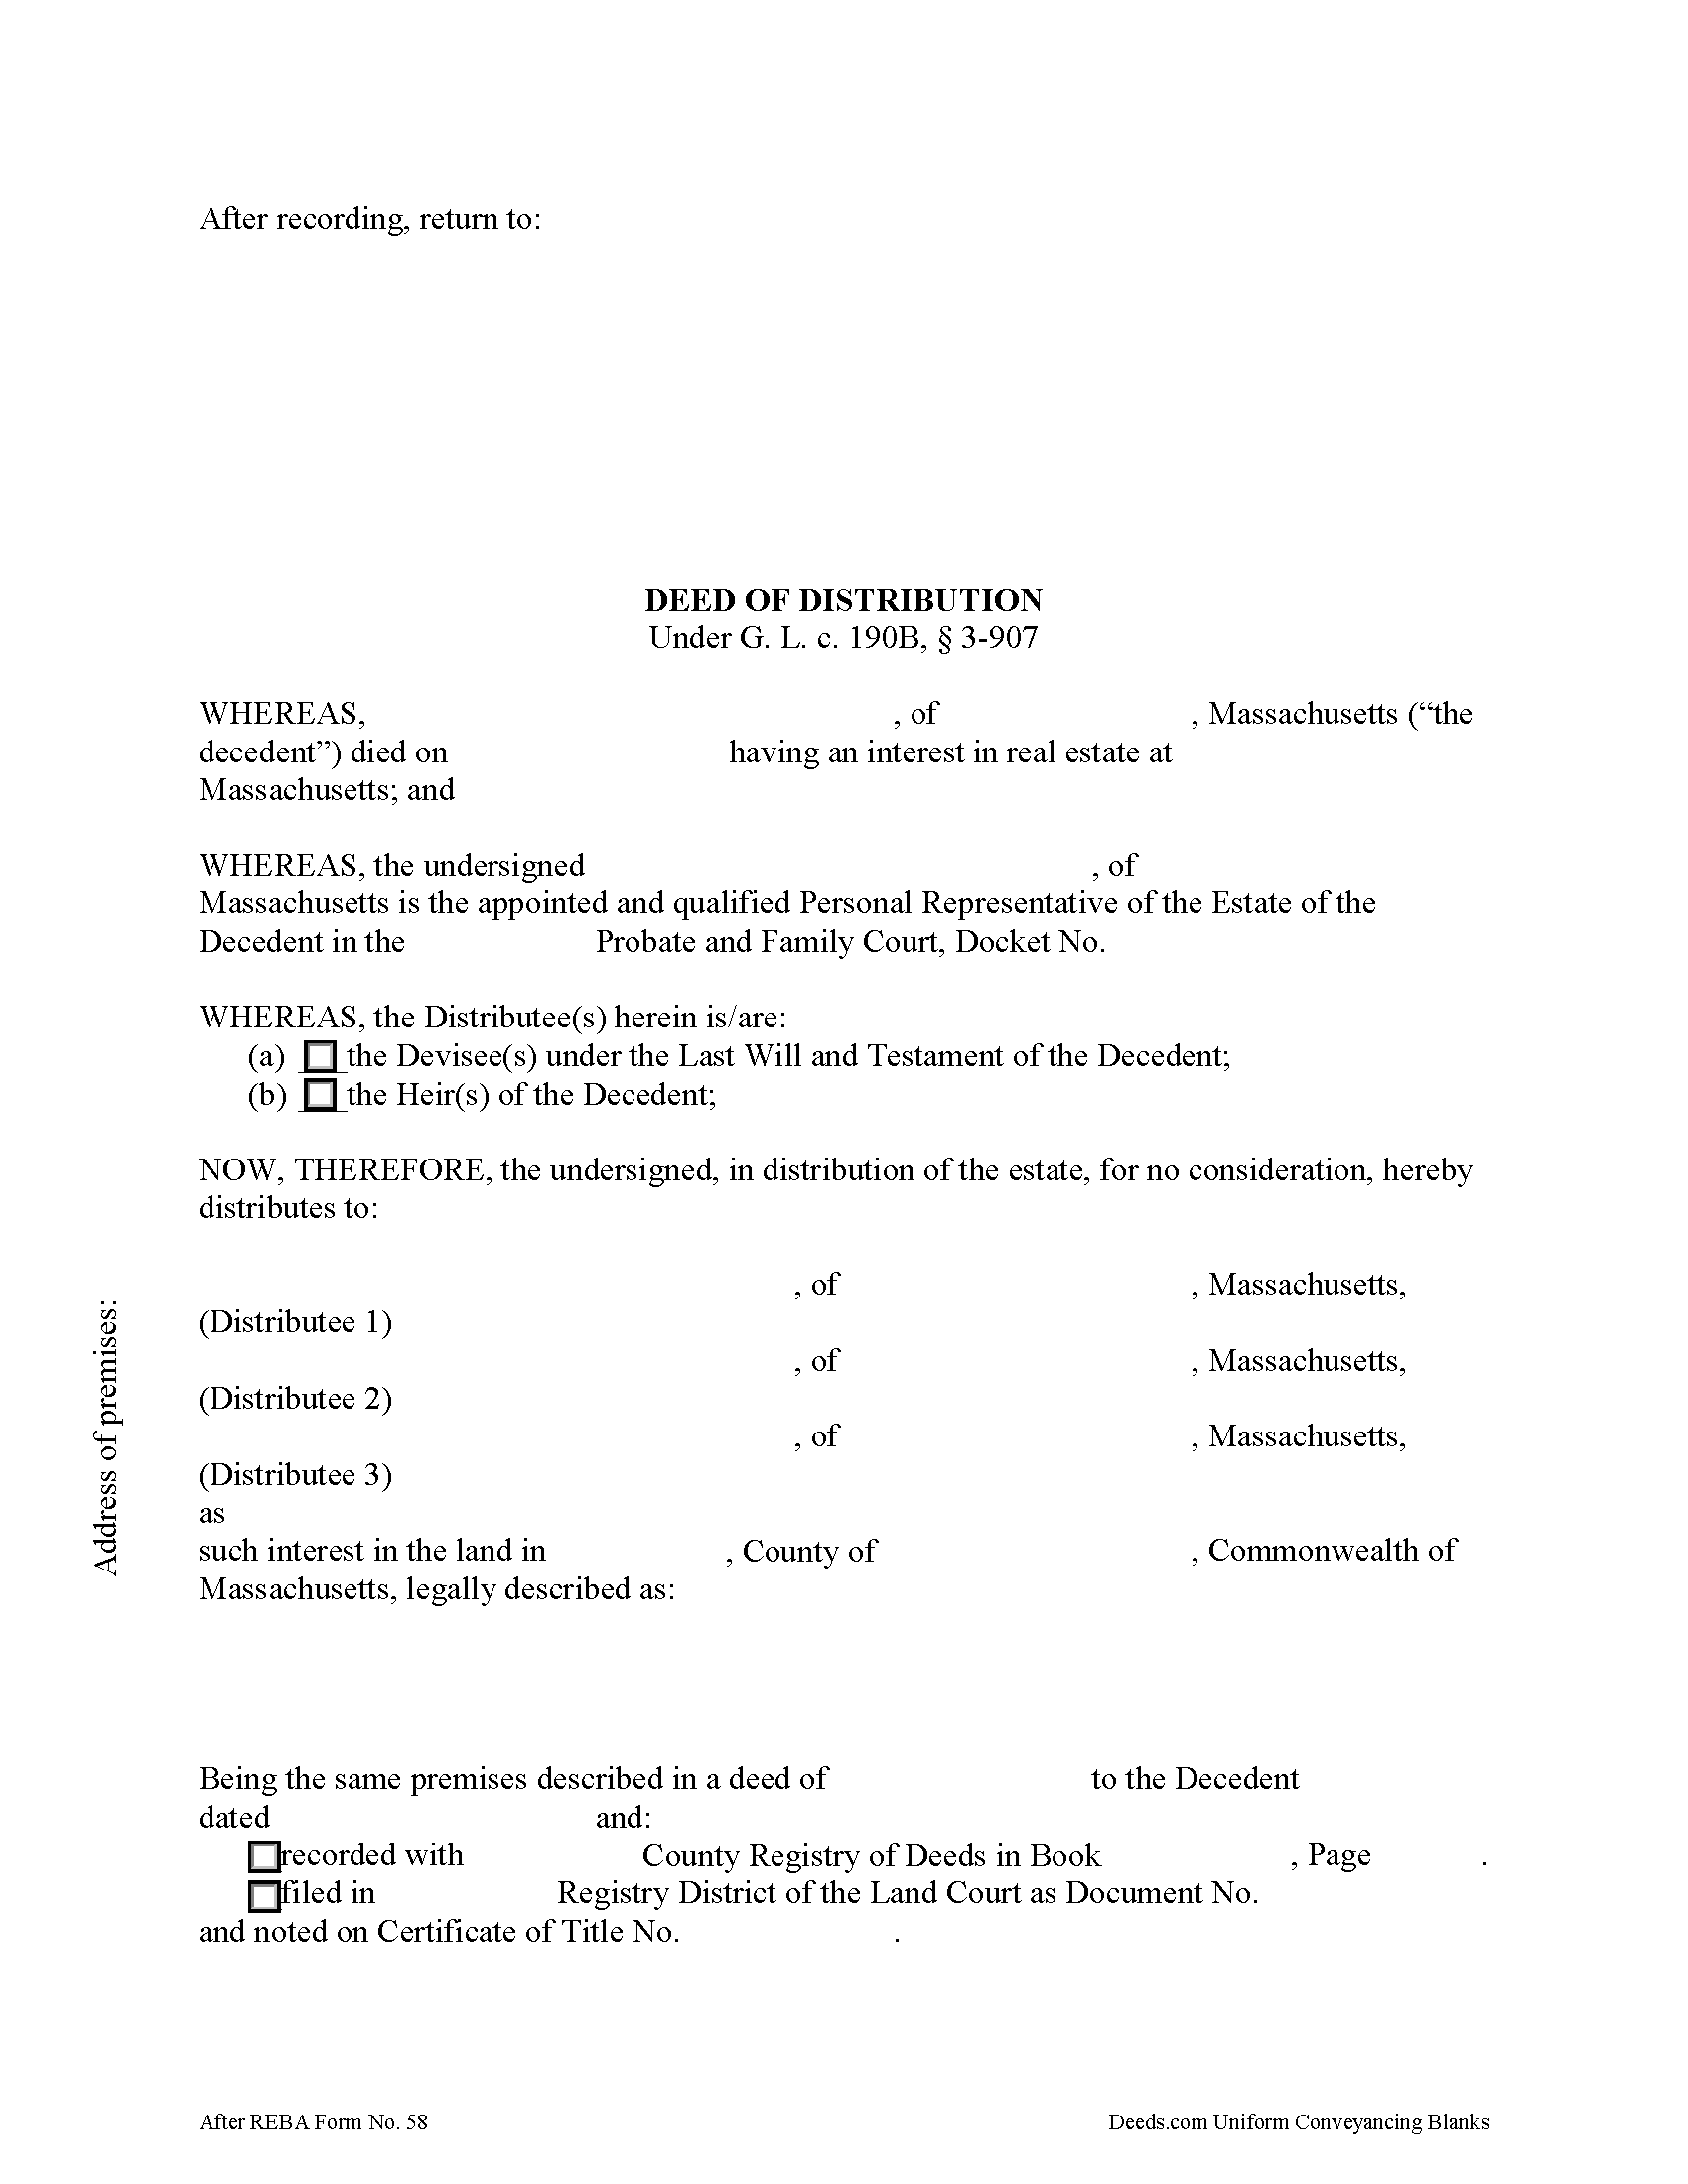 Personal Representative Deed of Distribution Form